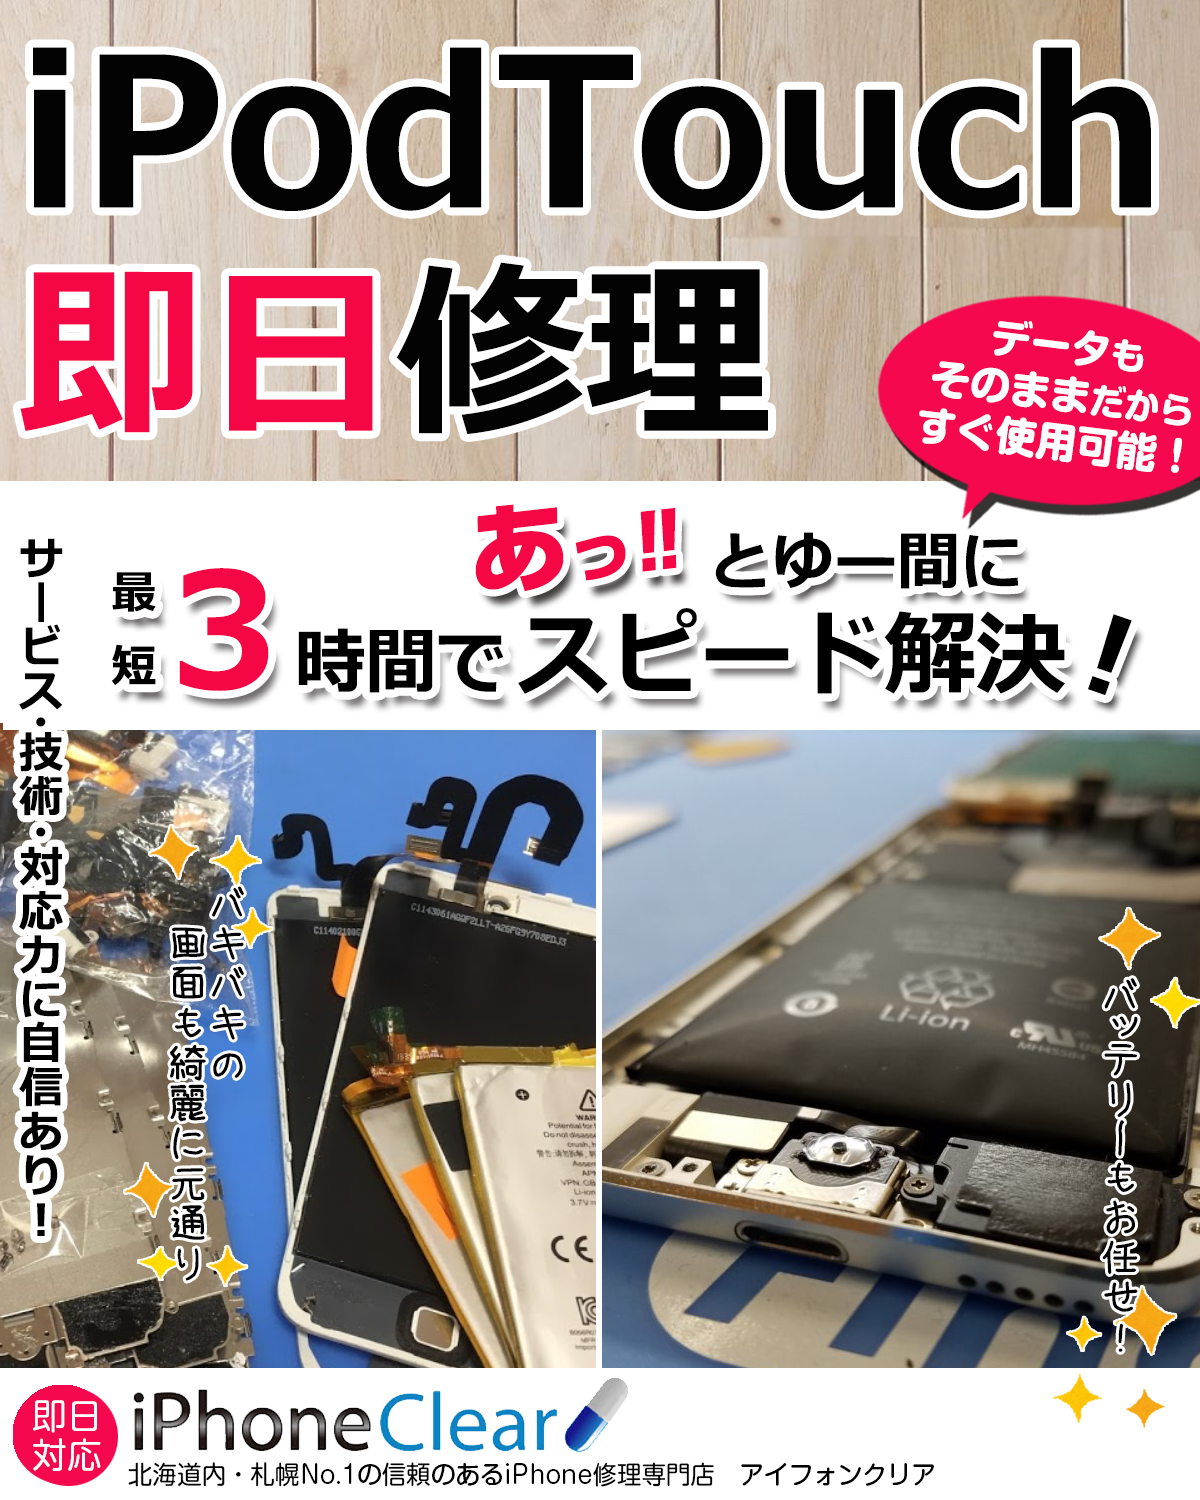 iPodTouch修理の案内画像